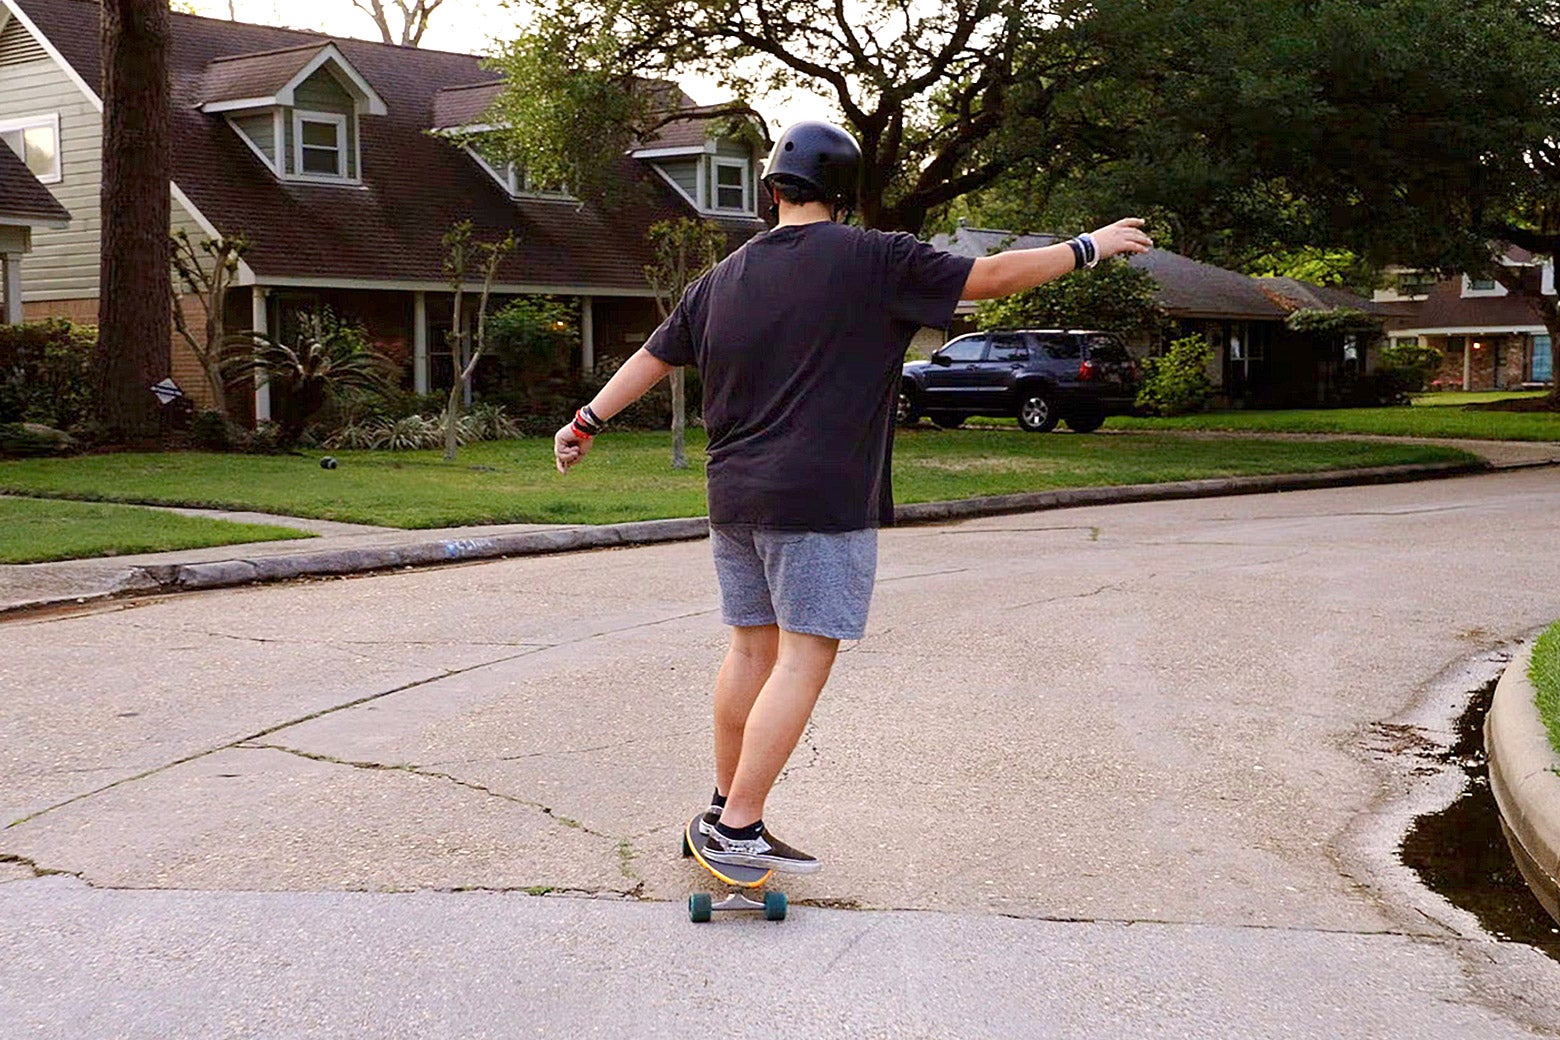 Noah is shown from the back skateboarding down a suburban street.